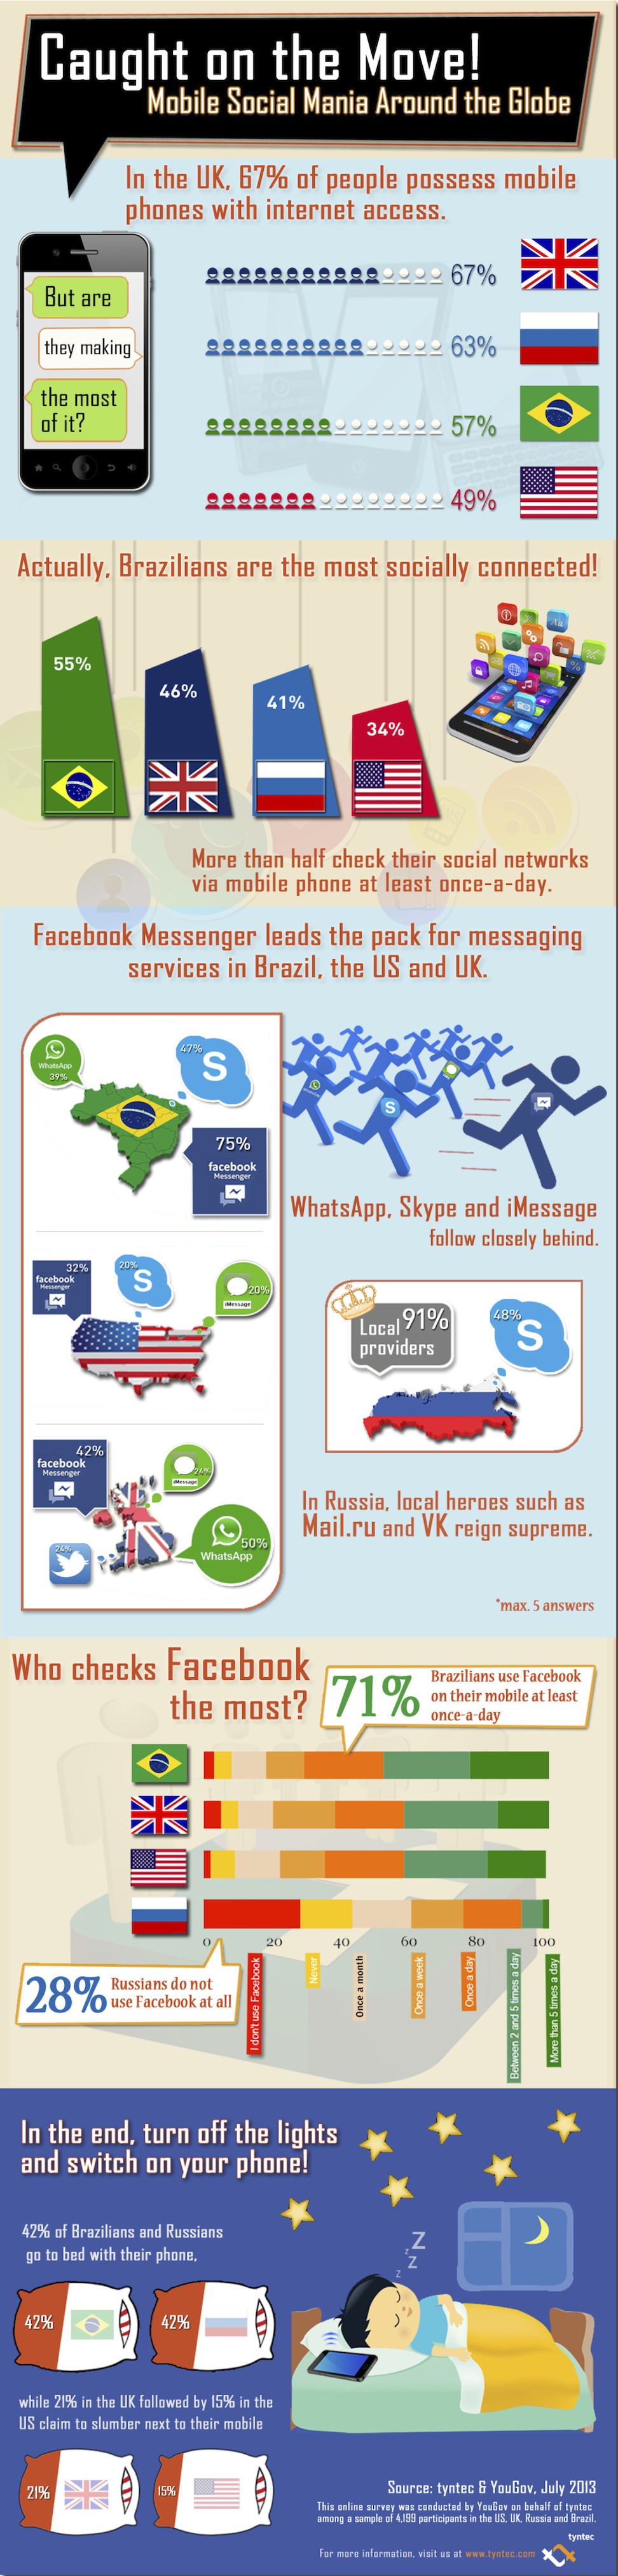 Consumer-Survey-Infographic_Mobile-Mania-by-YouGov-and-tyntec-FINAL2